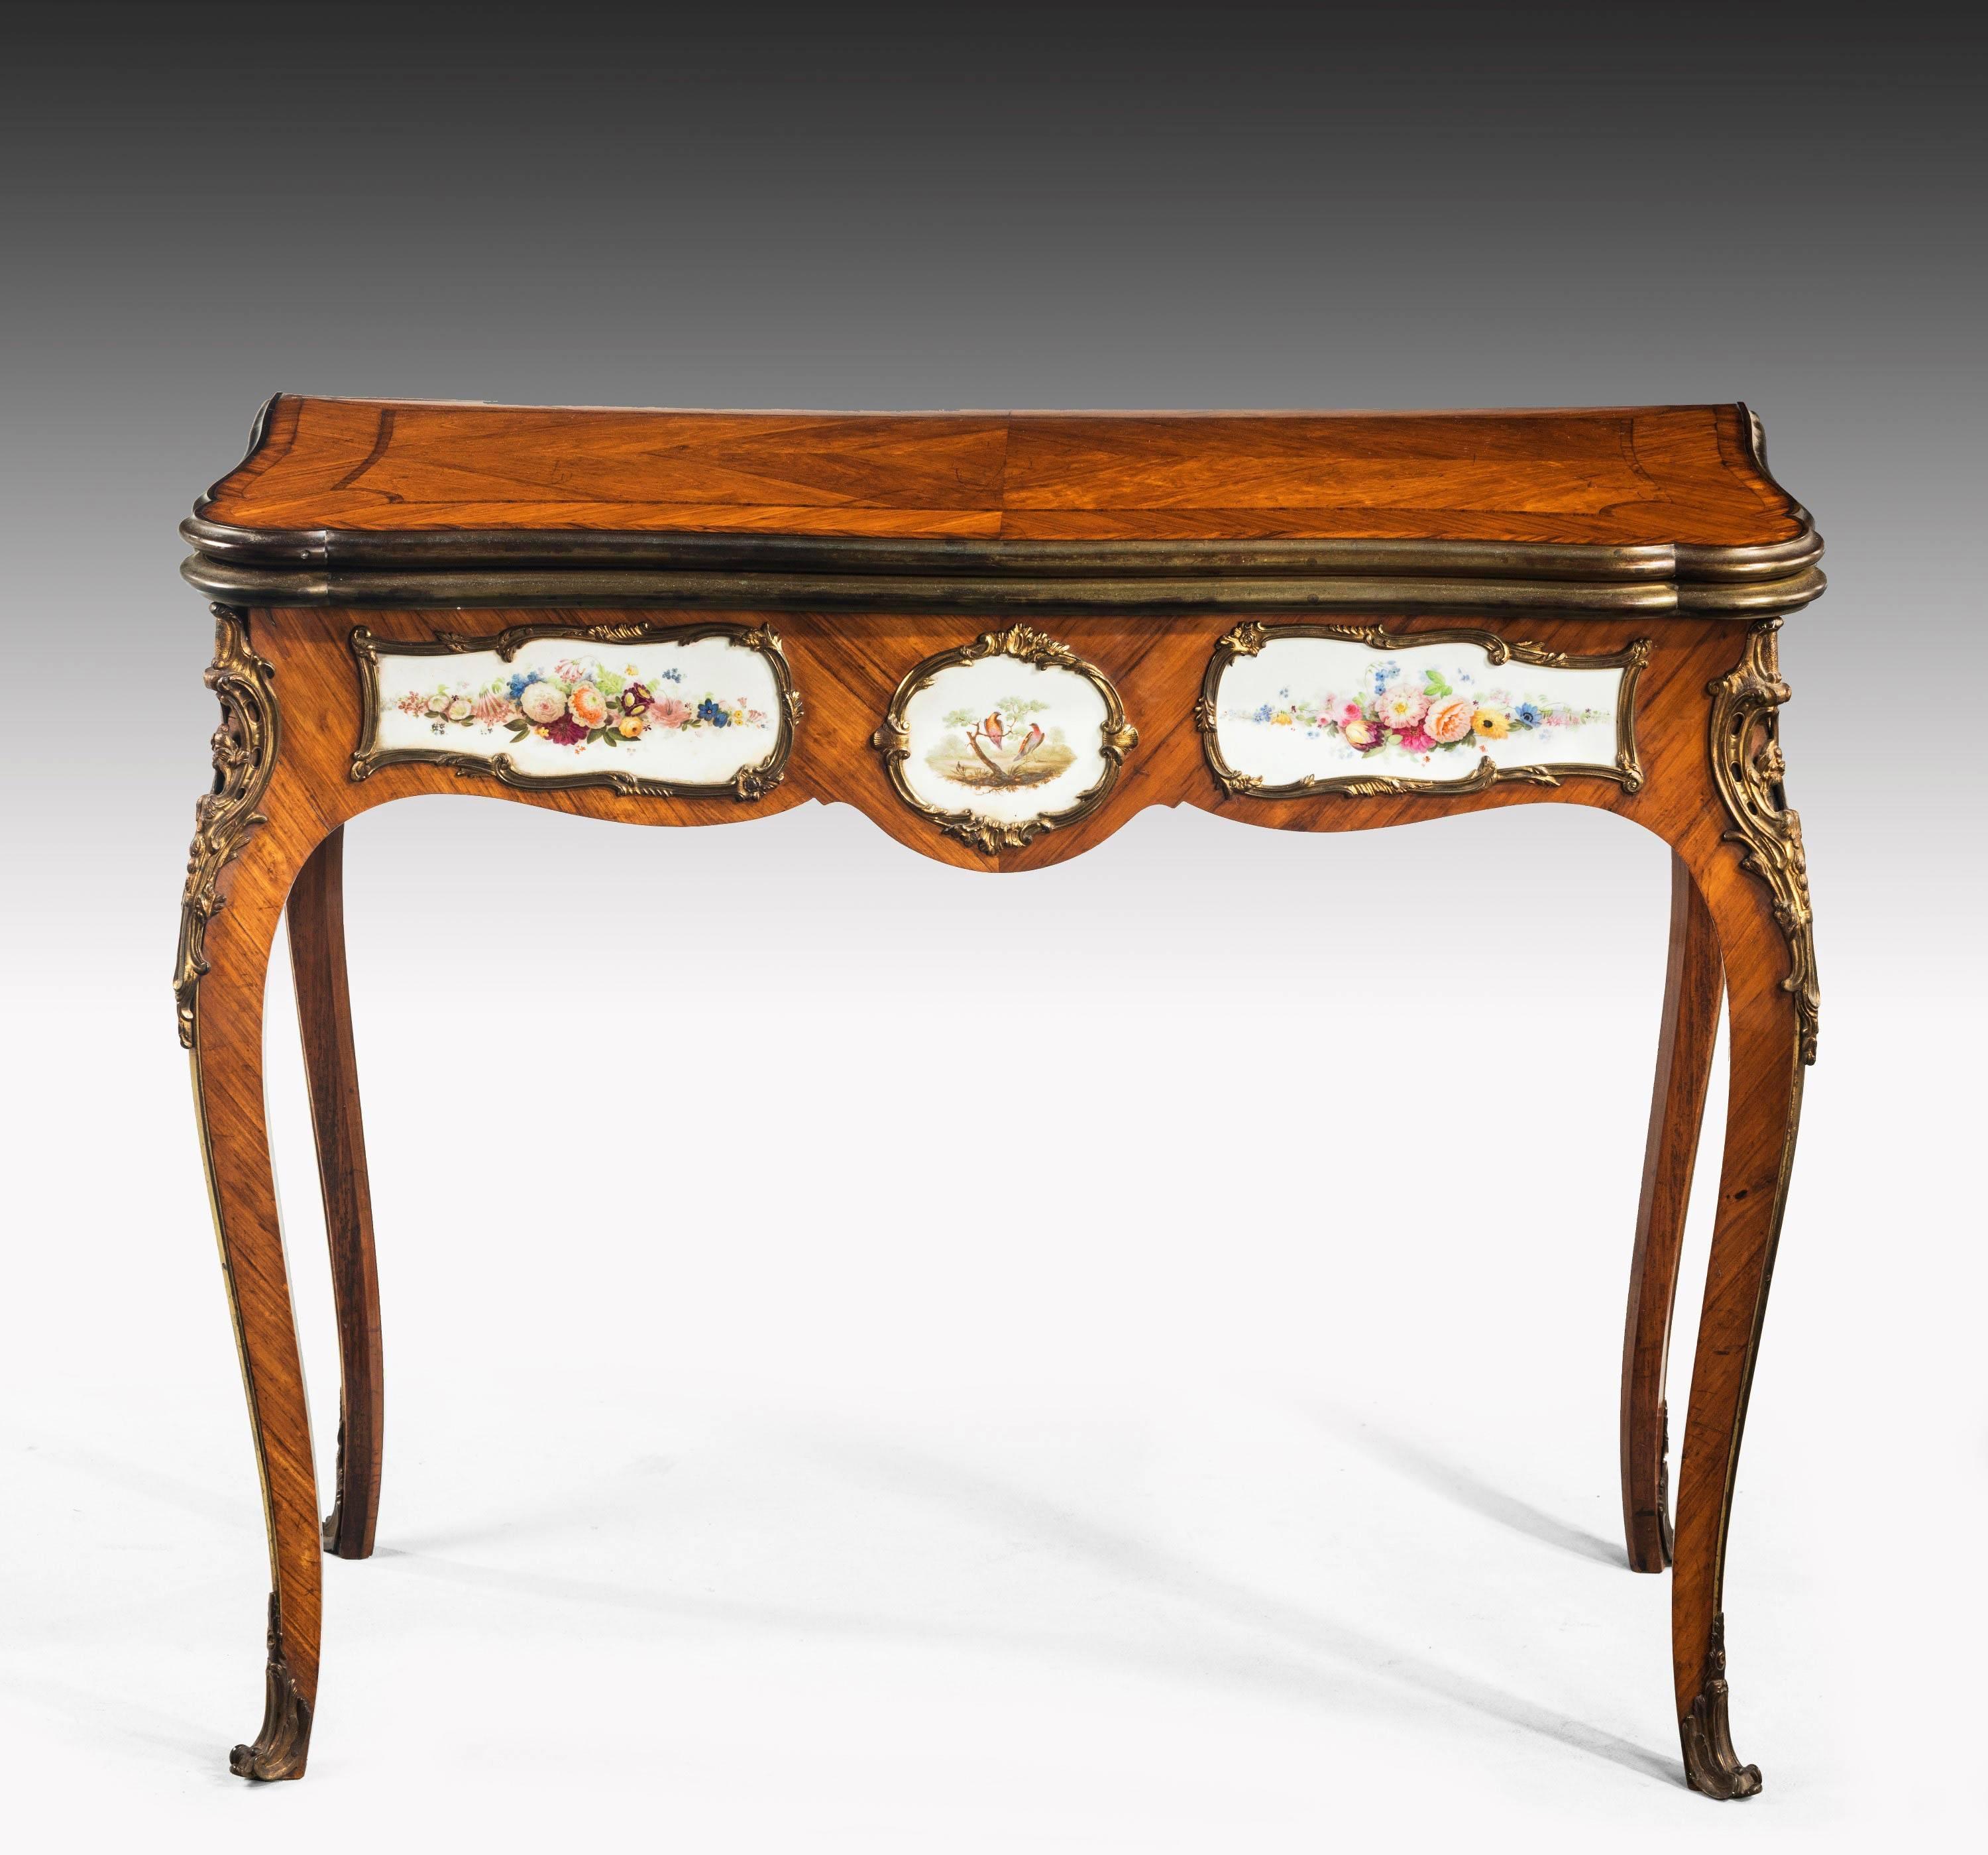 A quite exceptional kingwood games table. The top with a central base pattern which is finely quartered, within bandings and cross bandings and shaped Guinea wells. Crossbanded and banded decoration in rosewood and satinwood. The main fronts